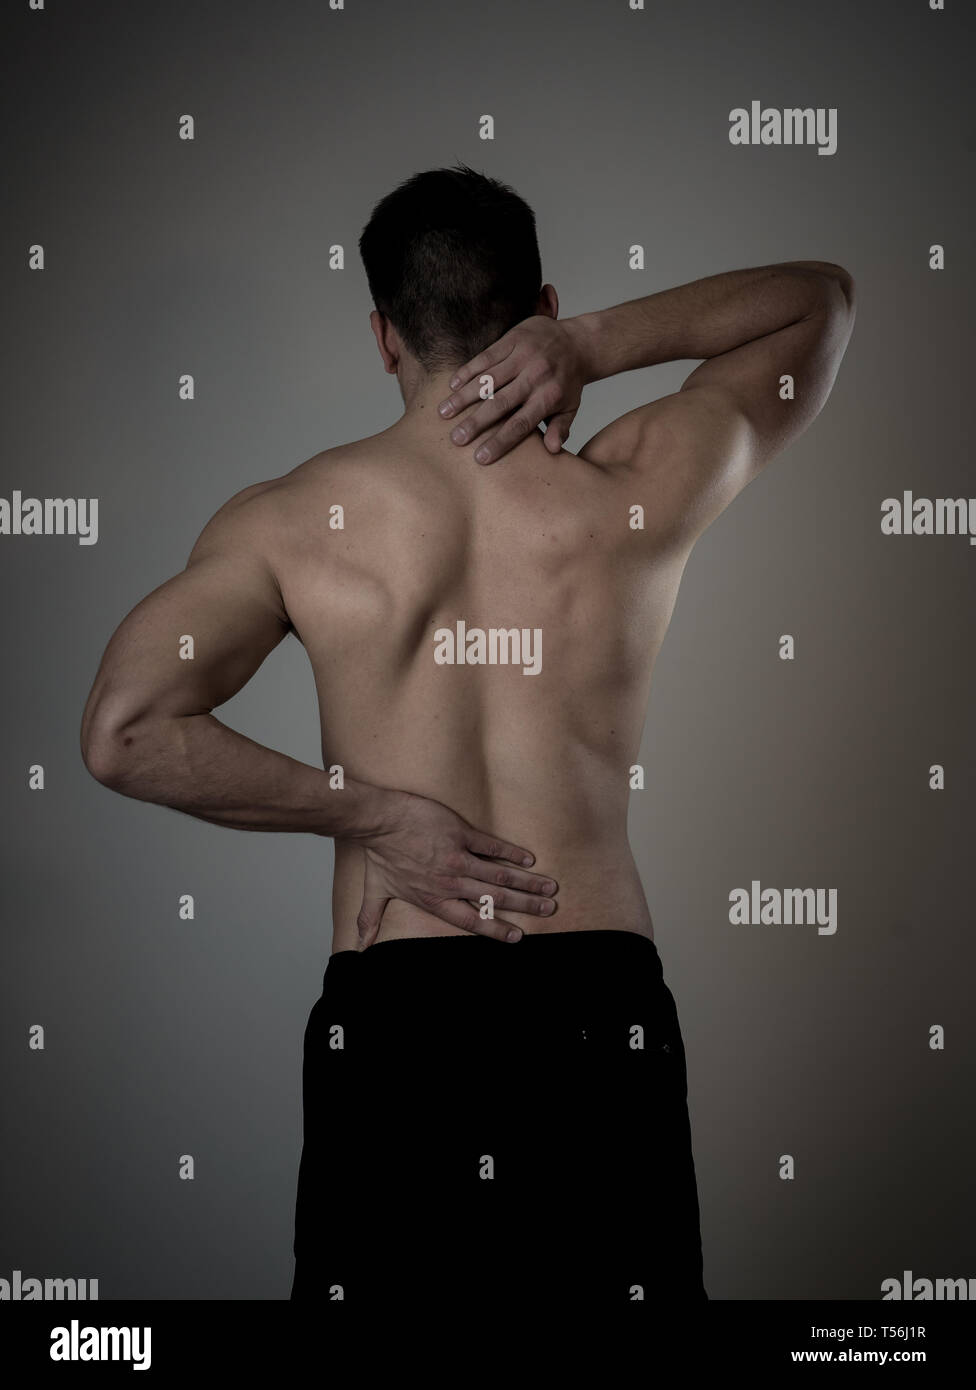 https://c8.alamy.com/comp/T56J1R/young-muscular-fitness-man-touching-and-grabbing-his-neck-and-lower-back-suffering-cervical-pain-isolated-on-neutral-background-in-sport-and-workout-T56J1R.jpg